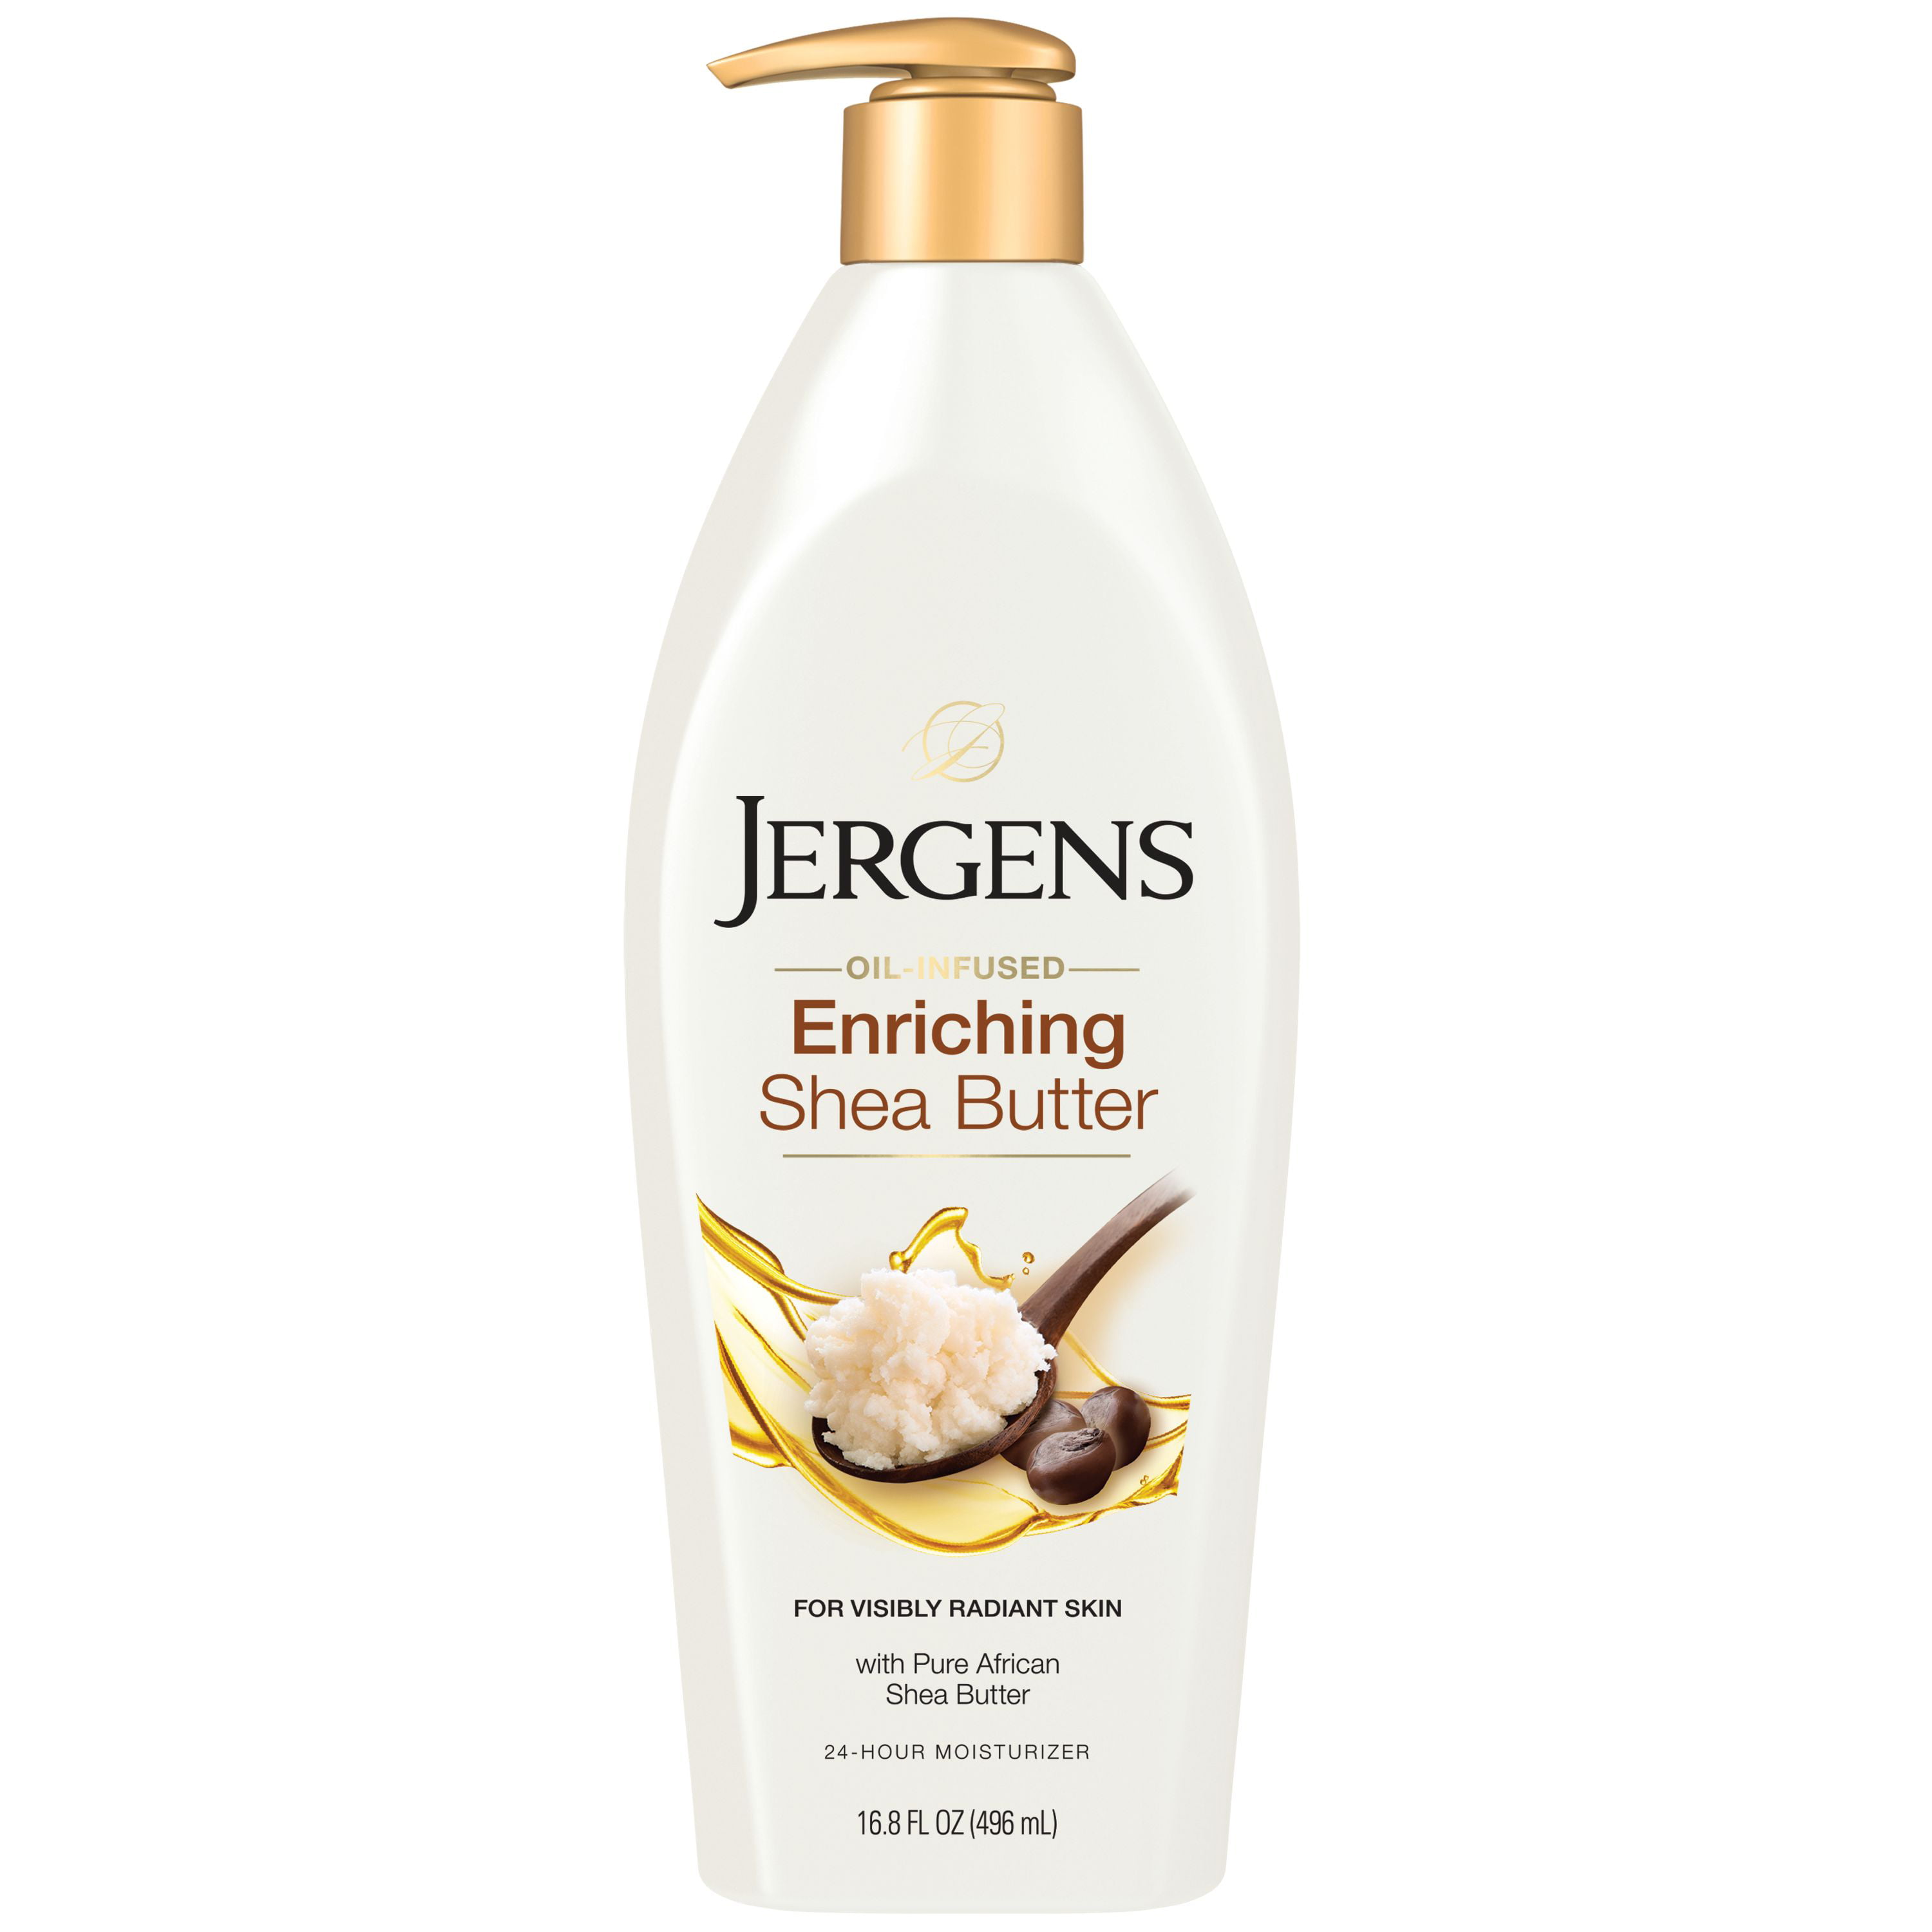 jergens-enriching-shea-butter-oil-infused-moisturizing-lotion-16-8-oz